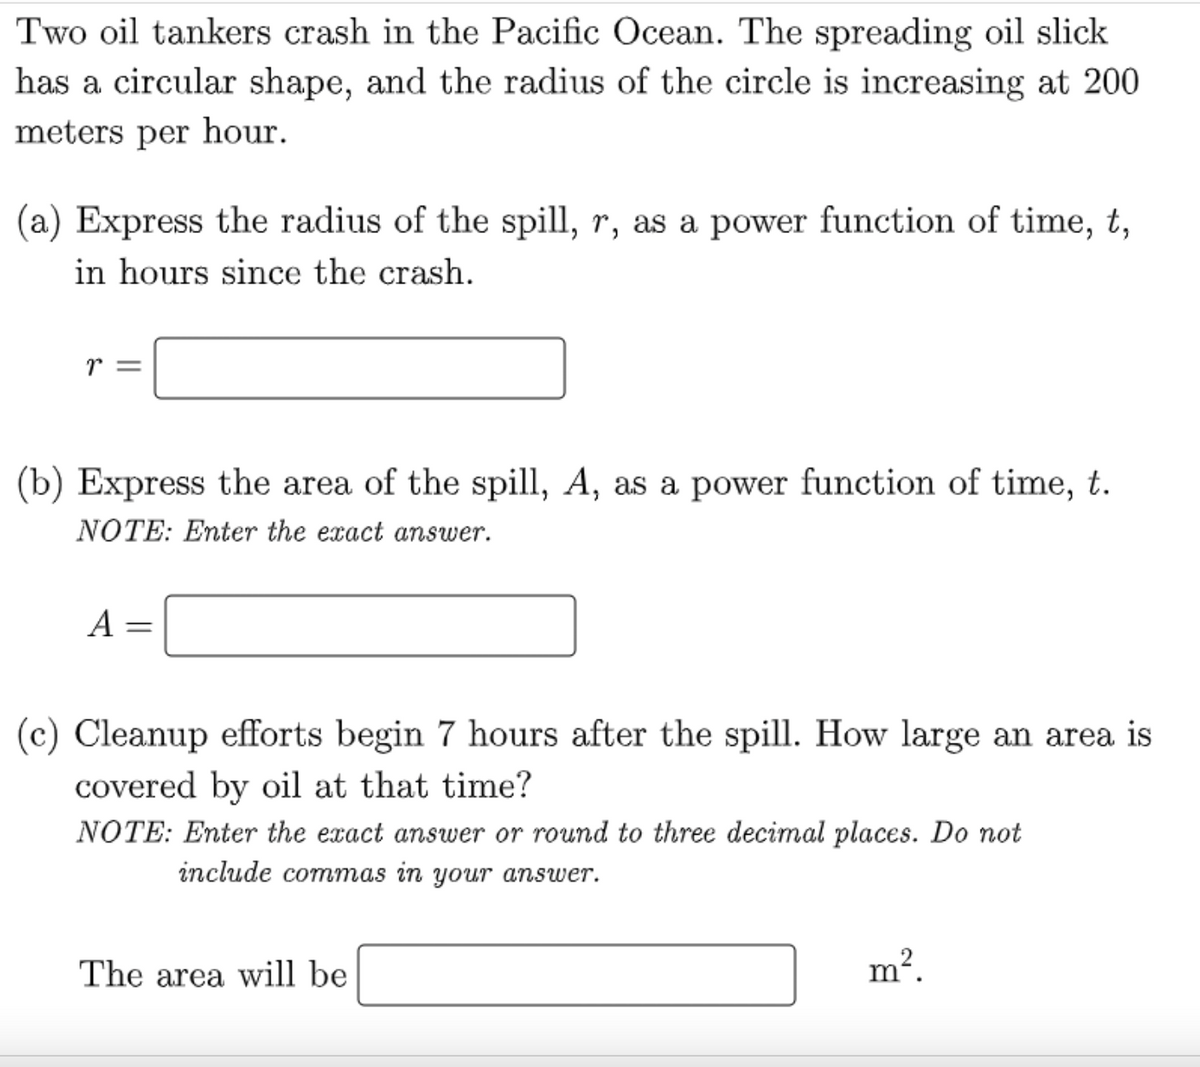 Two oil tankers crash in the Pacific Ocean. The spreading oil slick
has a circular shape, and the radius of the circle is increasing at 200
meters per hour.
(a) Express the radius of the spill, r, as a power function of time, t,
in hours since the crash.
r =
(b) Express the area of the spill, A, as a power function of time, t.
NOTE: Enter the exact answer.
A
=
(c) Cleanup efforts begin 7 hours after the spill. How large an area is
covered by oil at that time?
NOTE: Enter the exact answer or round to three decimal places. Do not
include commas in your answer.
The area will be
m².